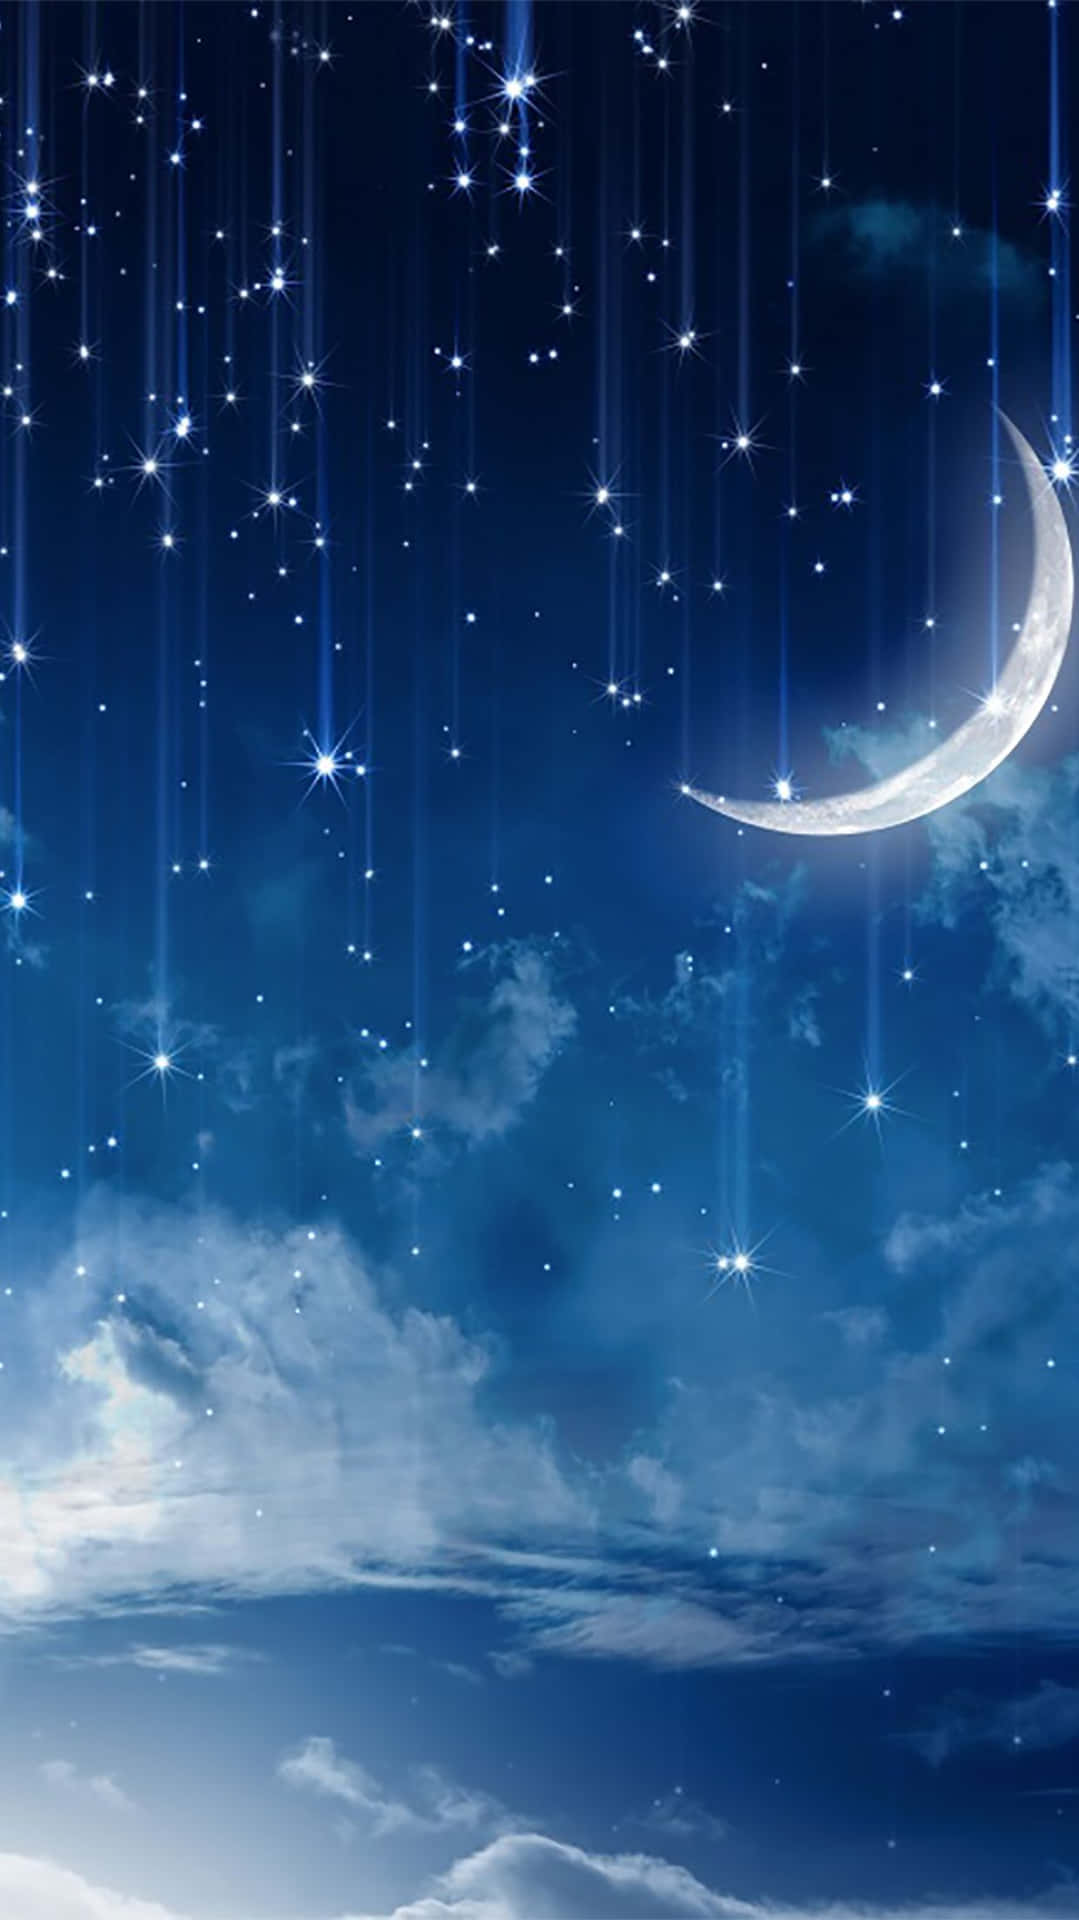 "Gaze upon the night sky and be in awe of the beauty of the moon and stars." Wallpaper